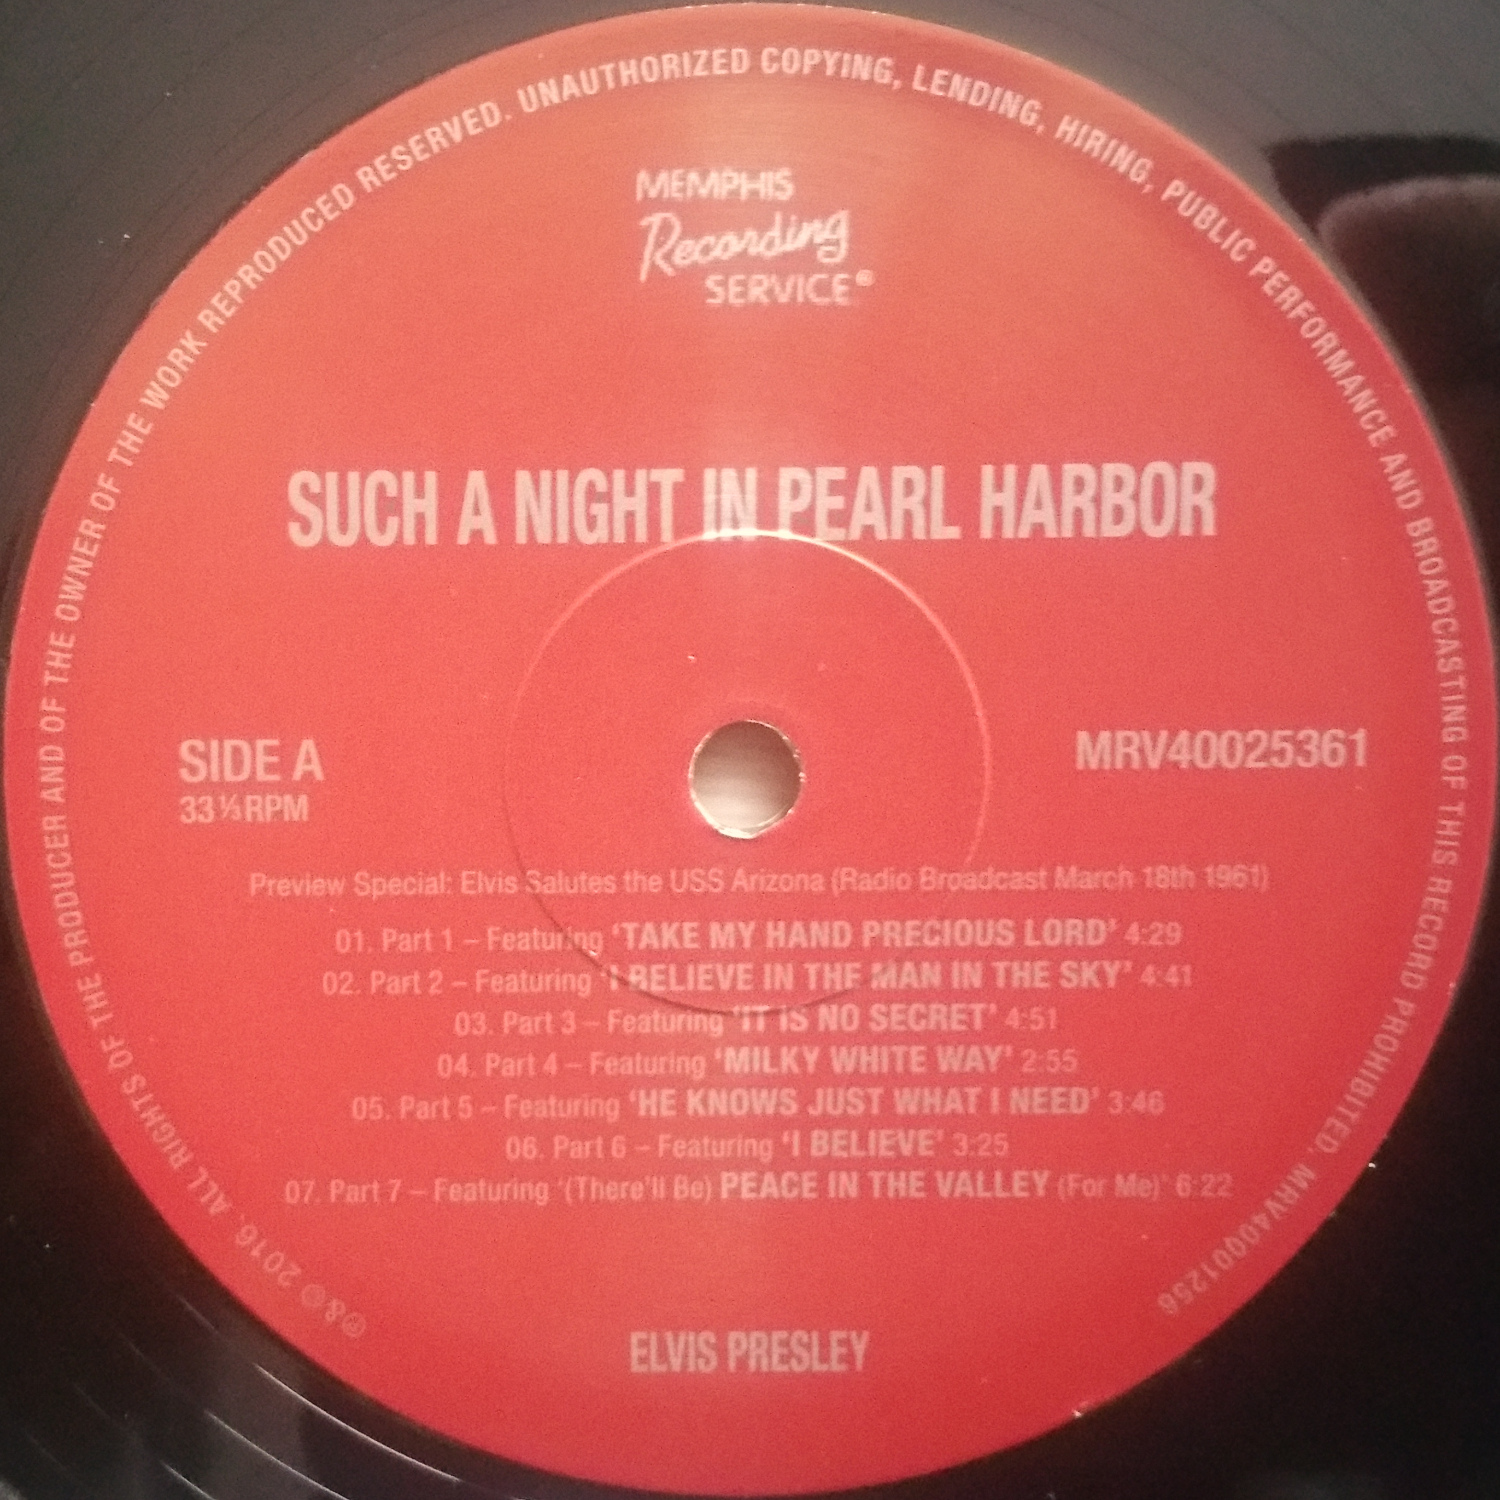 SUCH A NIGHT IN PEARL HARBOR Suchanightinpearlharb29k7o